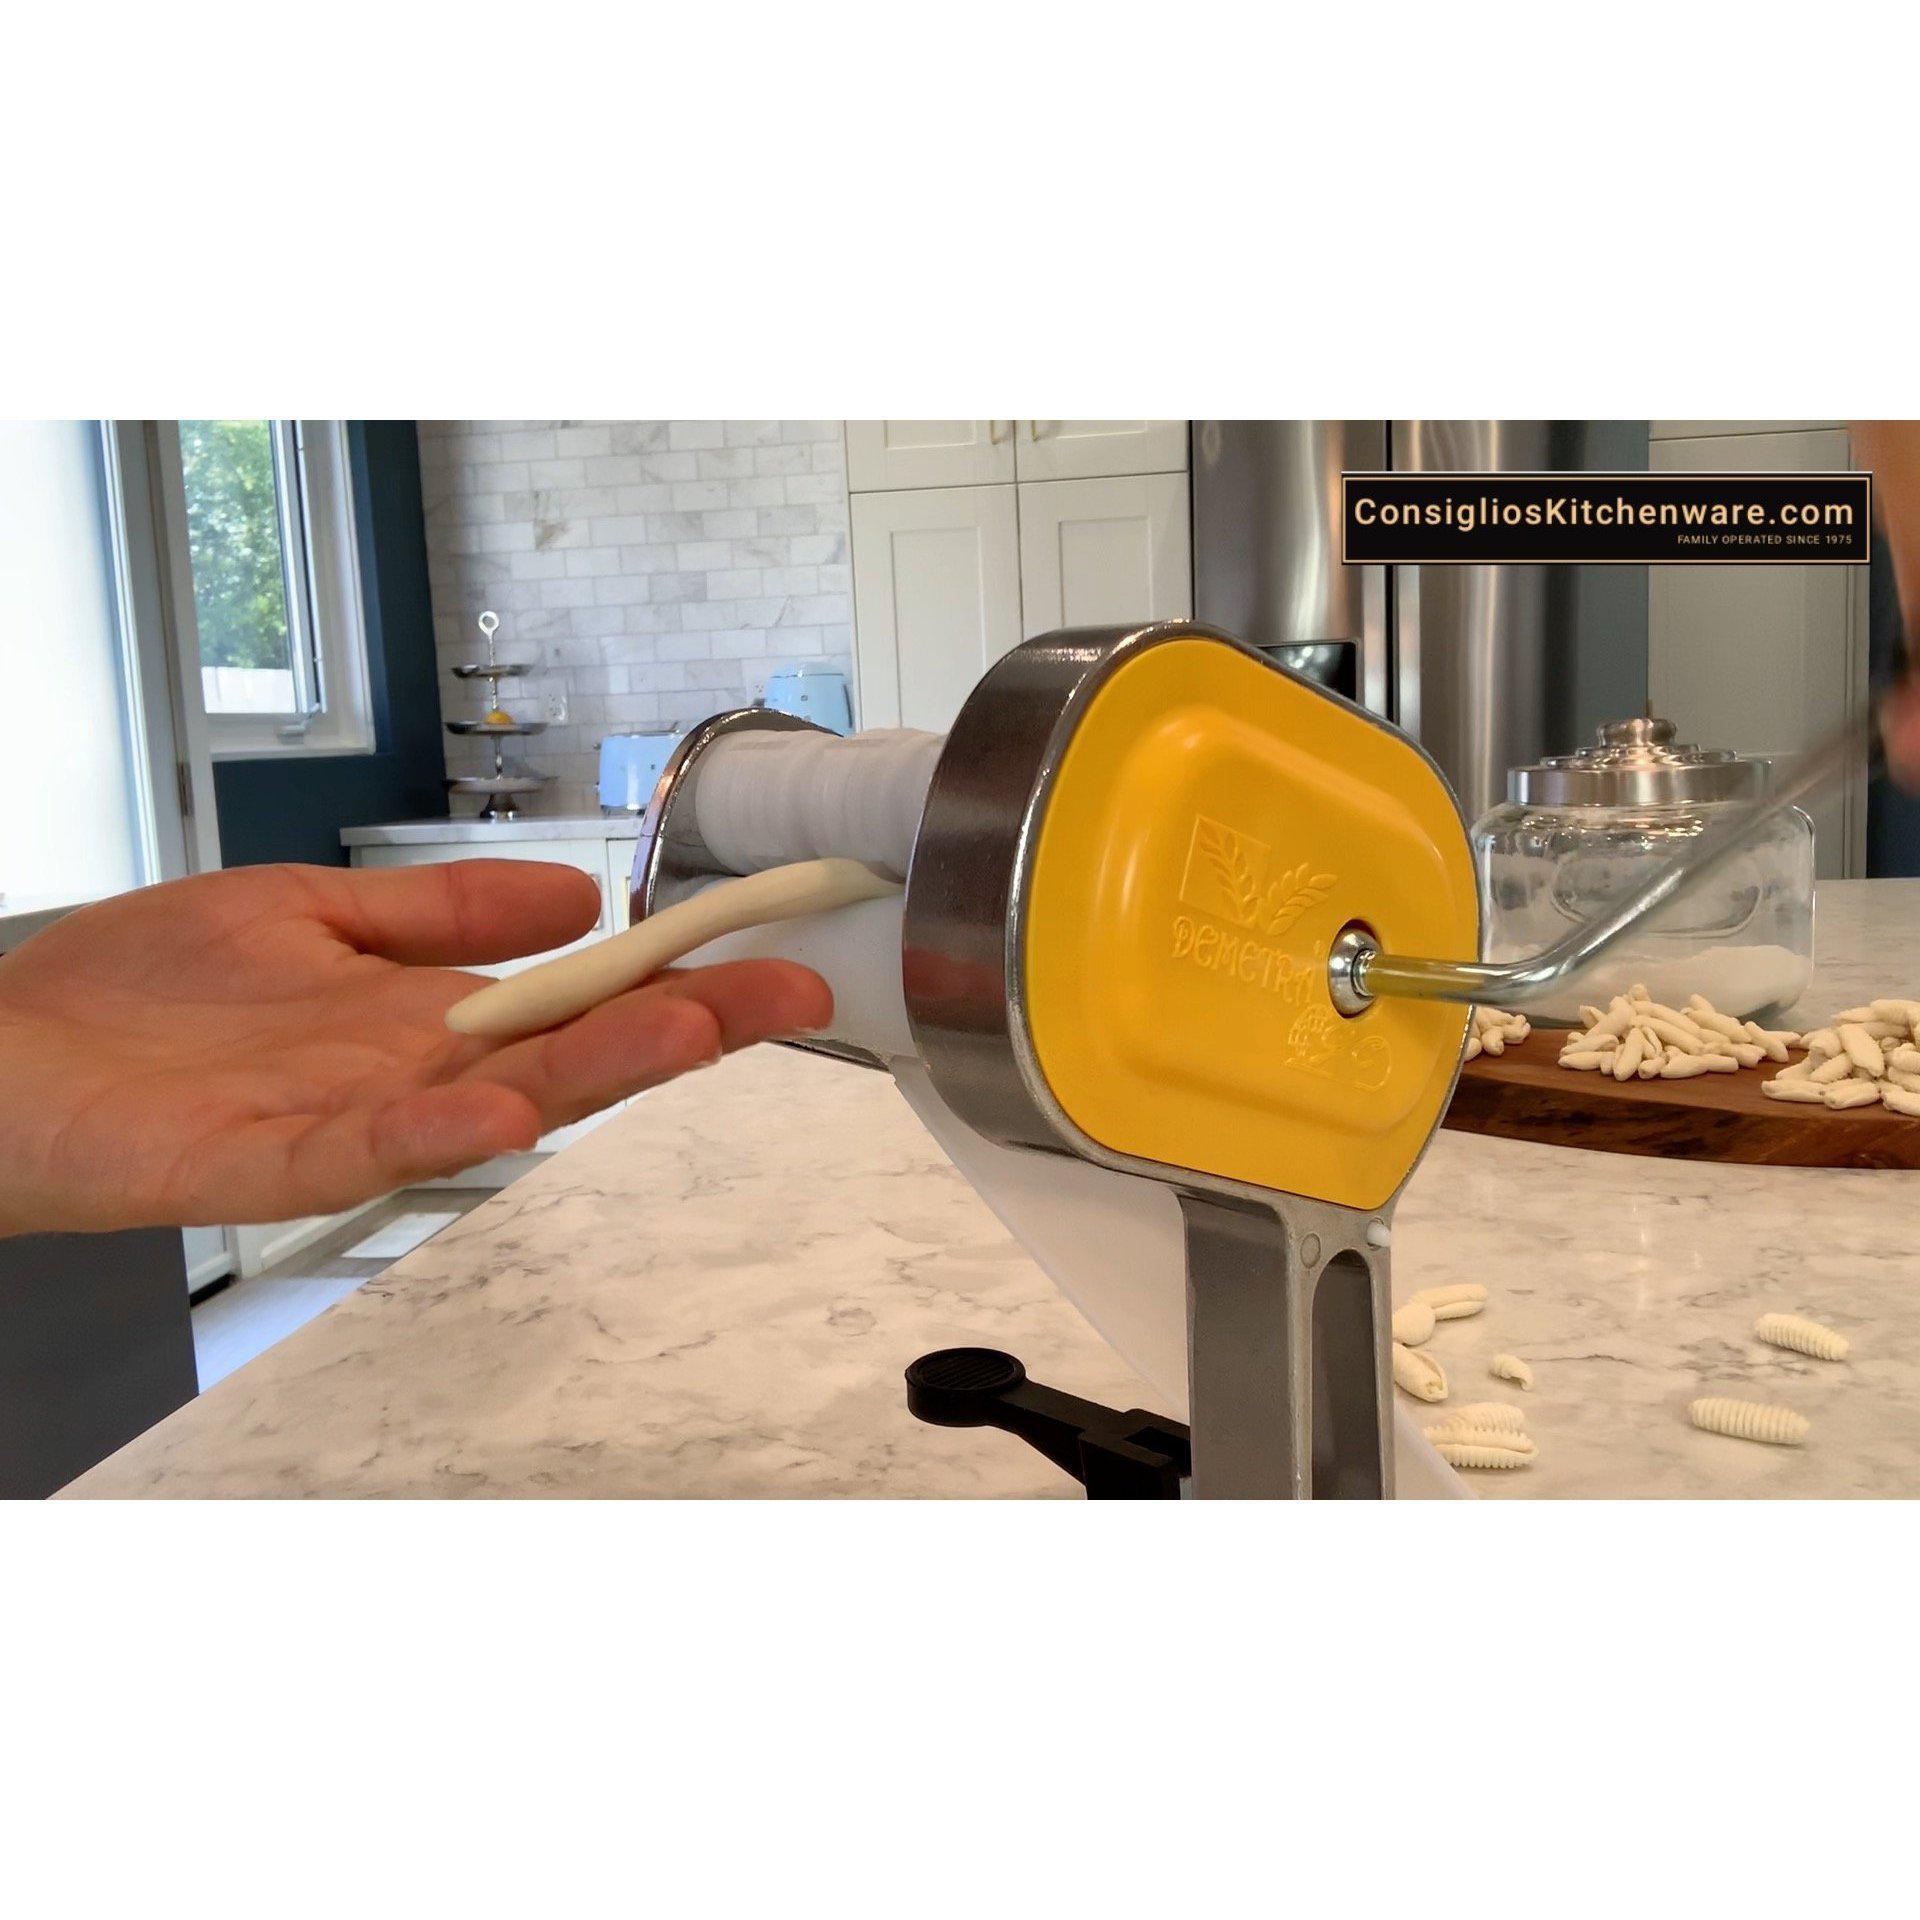 C A V A T E L L I 🍝😋 Using our premium cavatelli machine. This cavatelli  machine is made in Italy out of sturdy steel with nylon rollers, it even  has a, By Costante Imports